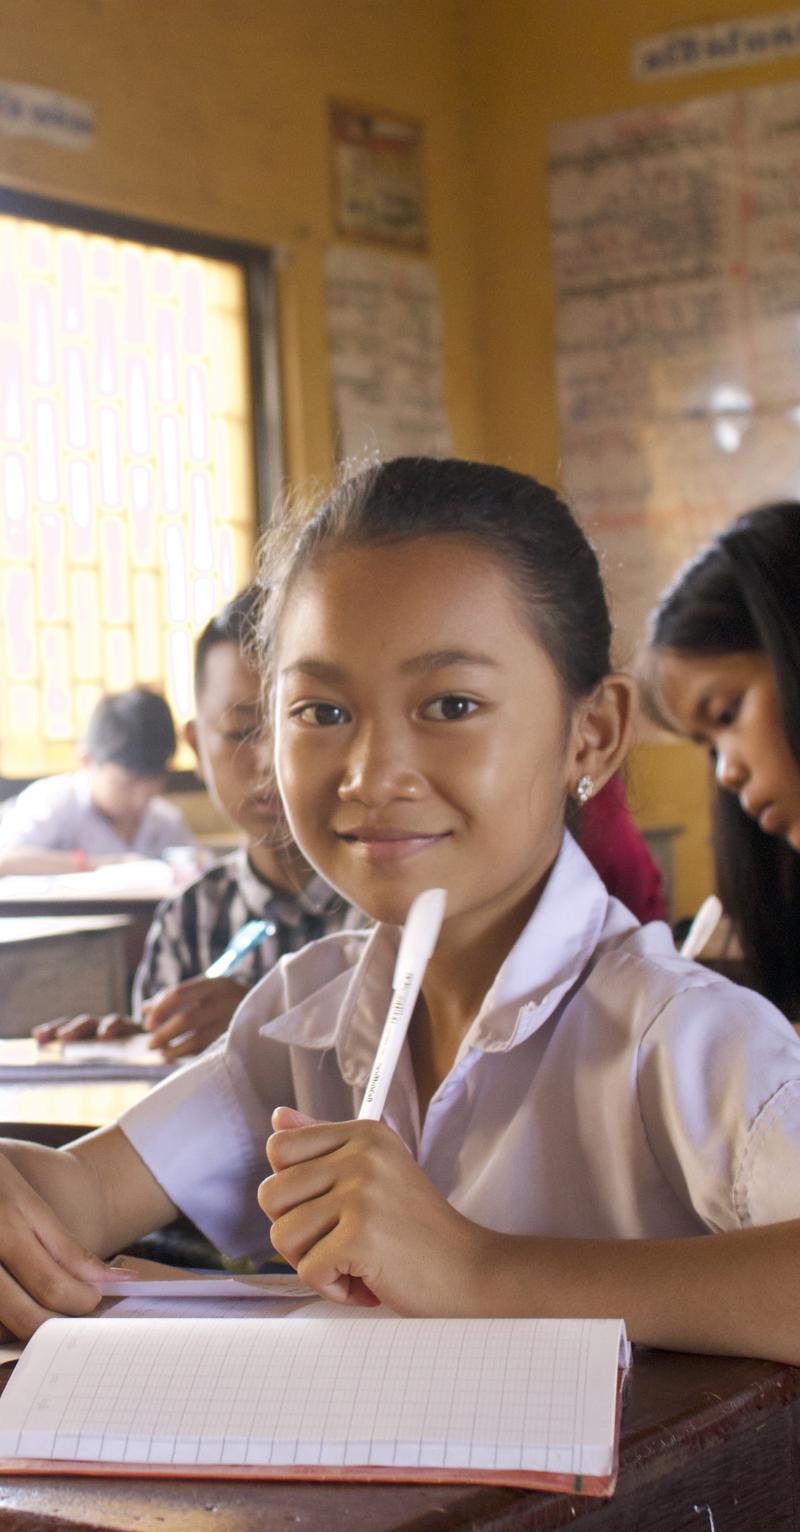 A young female Asian student is seated at a desk in a classroom, smiling as she looks directly into the camera